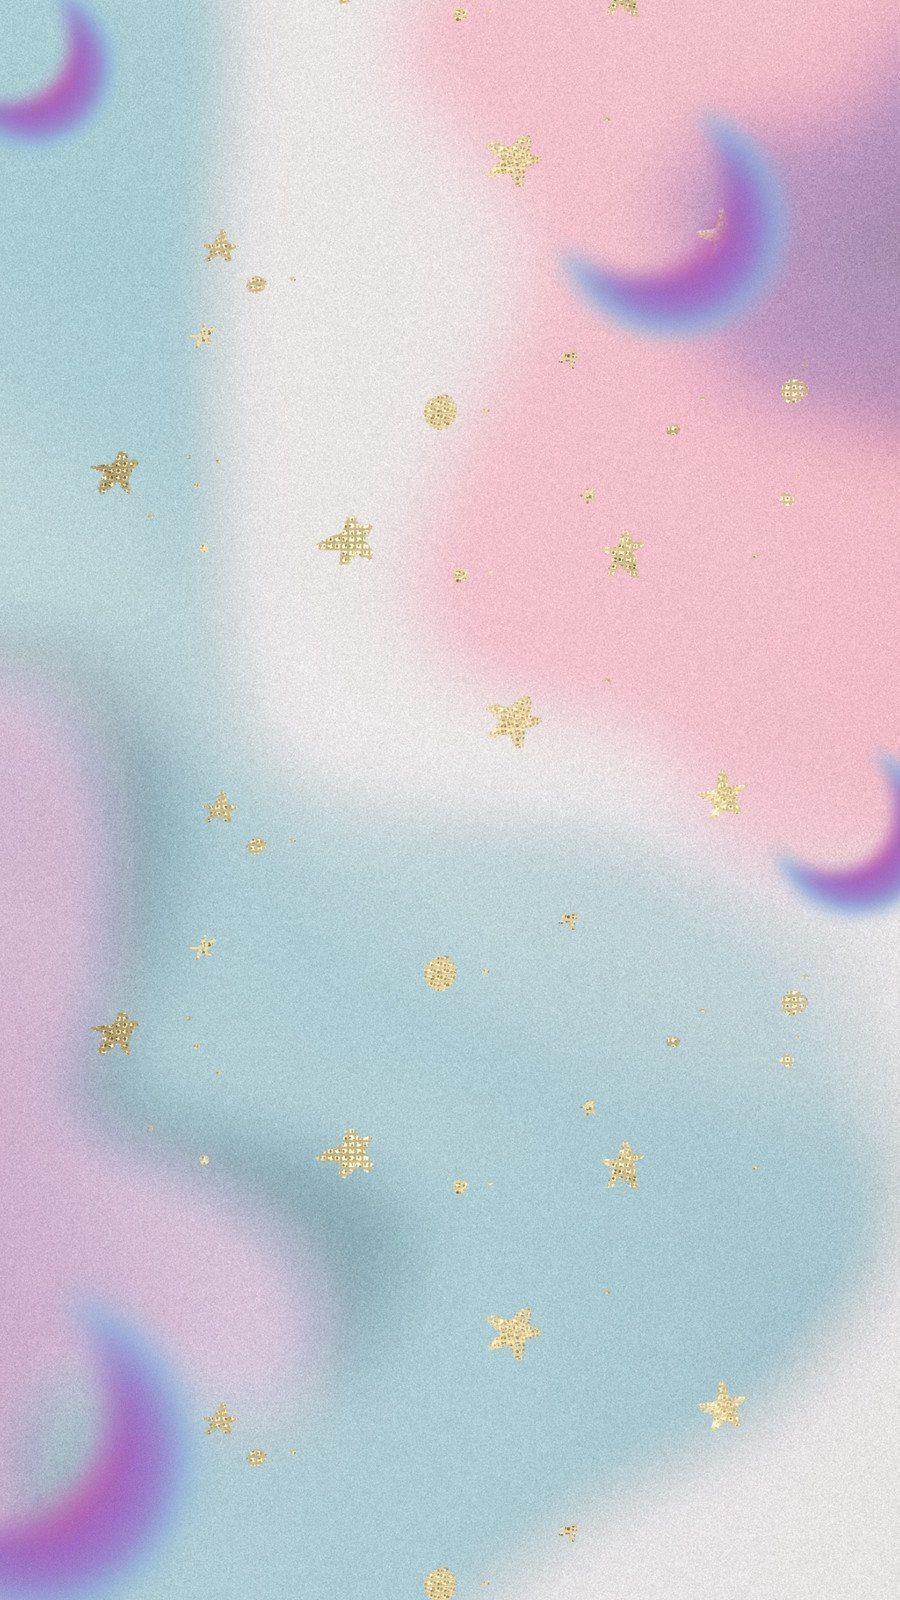 A pink and blue wallpaper with gold stars - Pastel rainbow, pretty